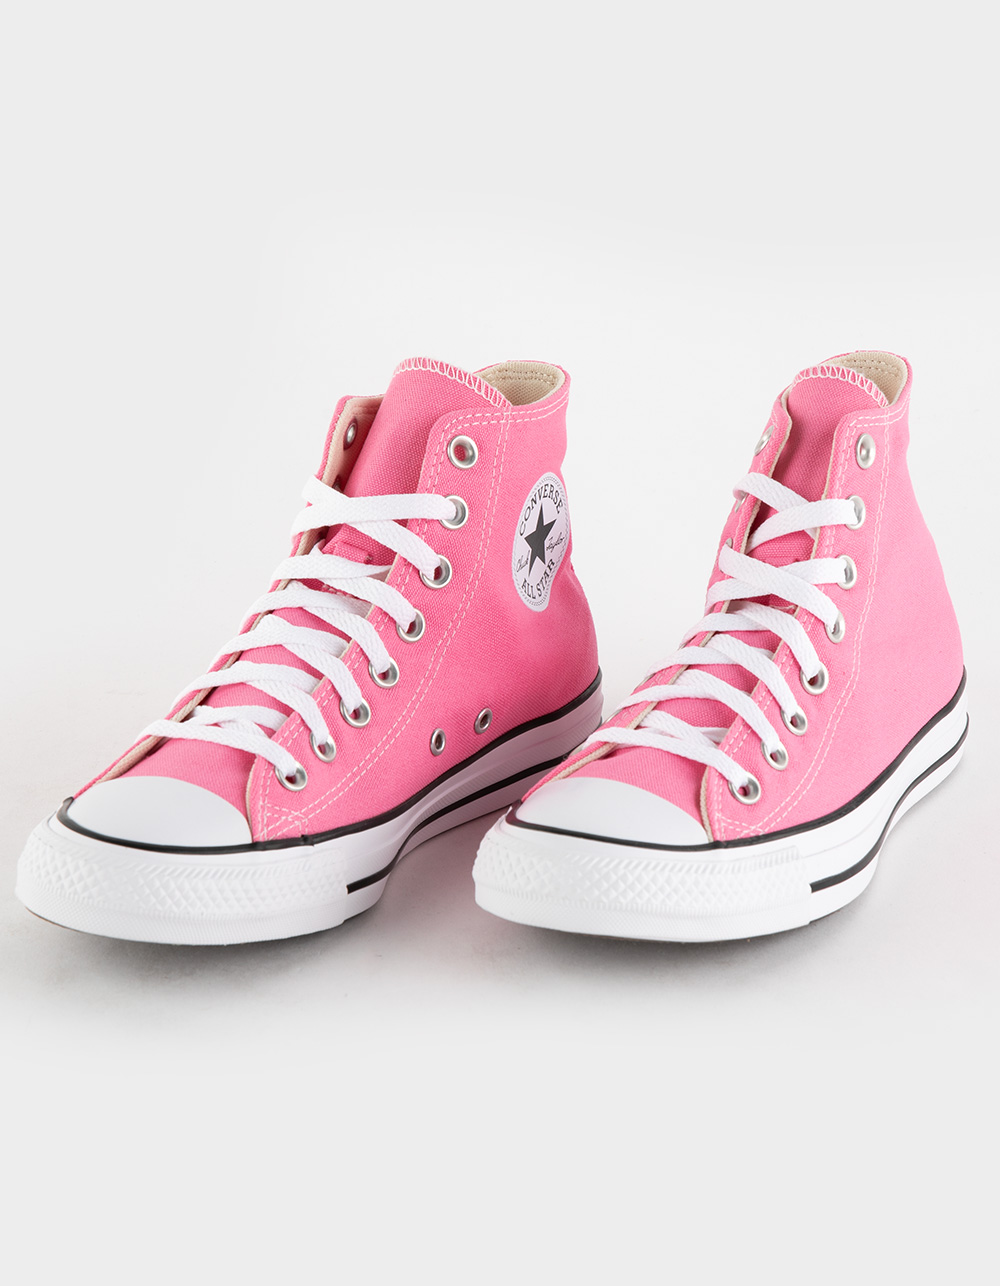 CONVERSE Chuck Taylor All Star Womens High Top Shoes